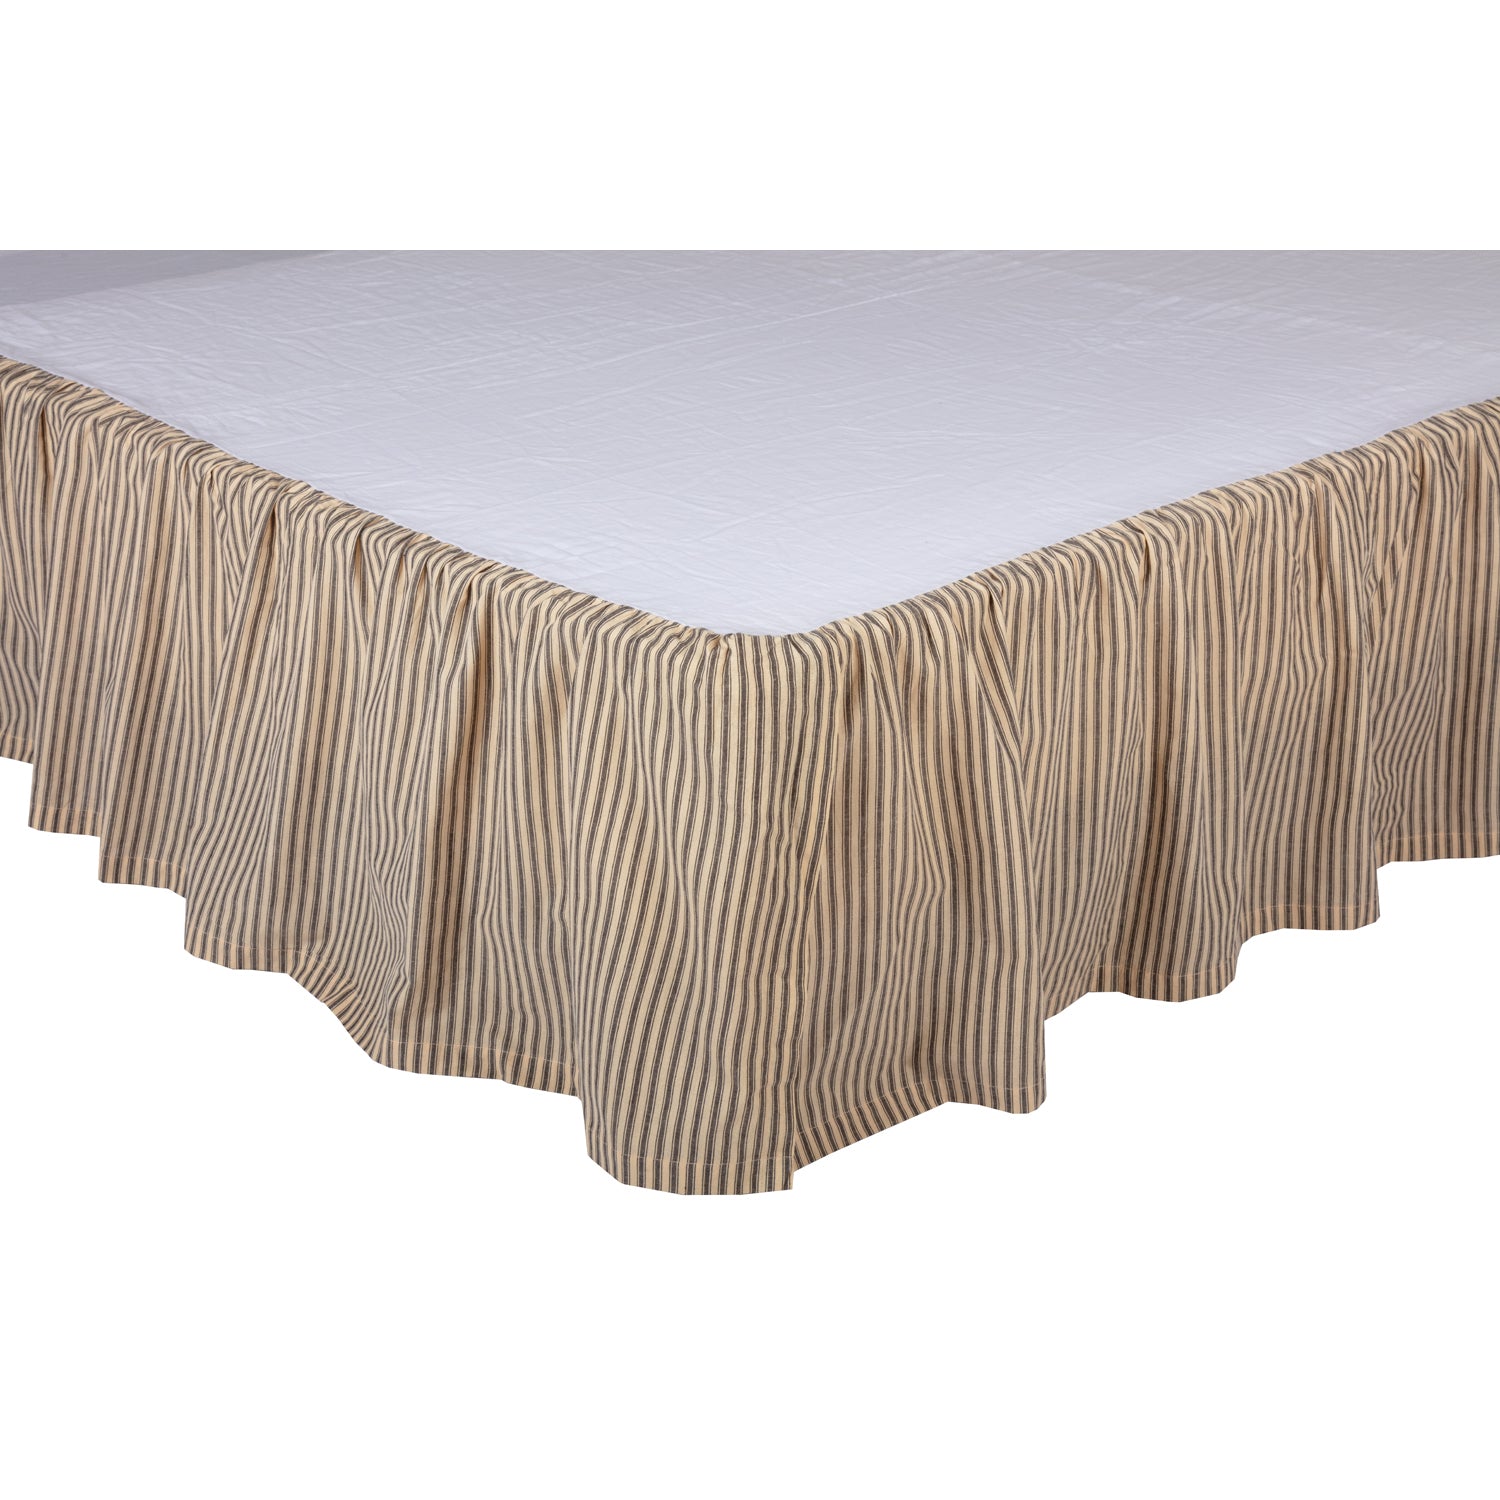 April & Olive Sawyer Mill Charcoal Ticking Stripe King Bed Skirt 78x80x16 By VHC Brands